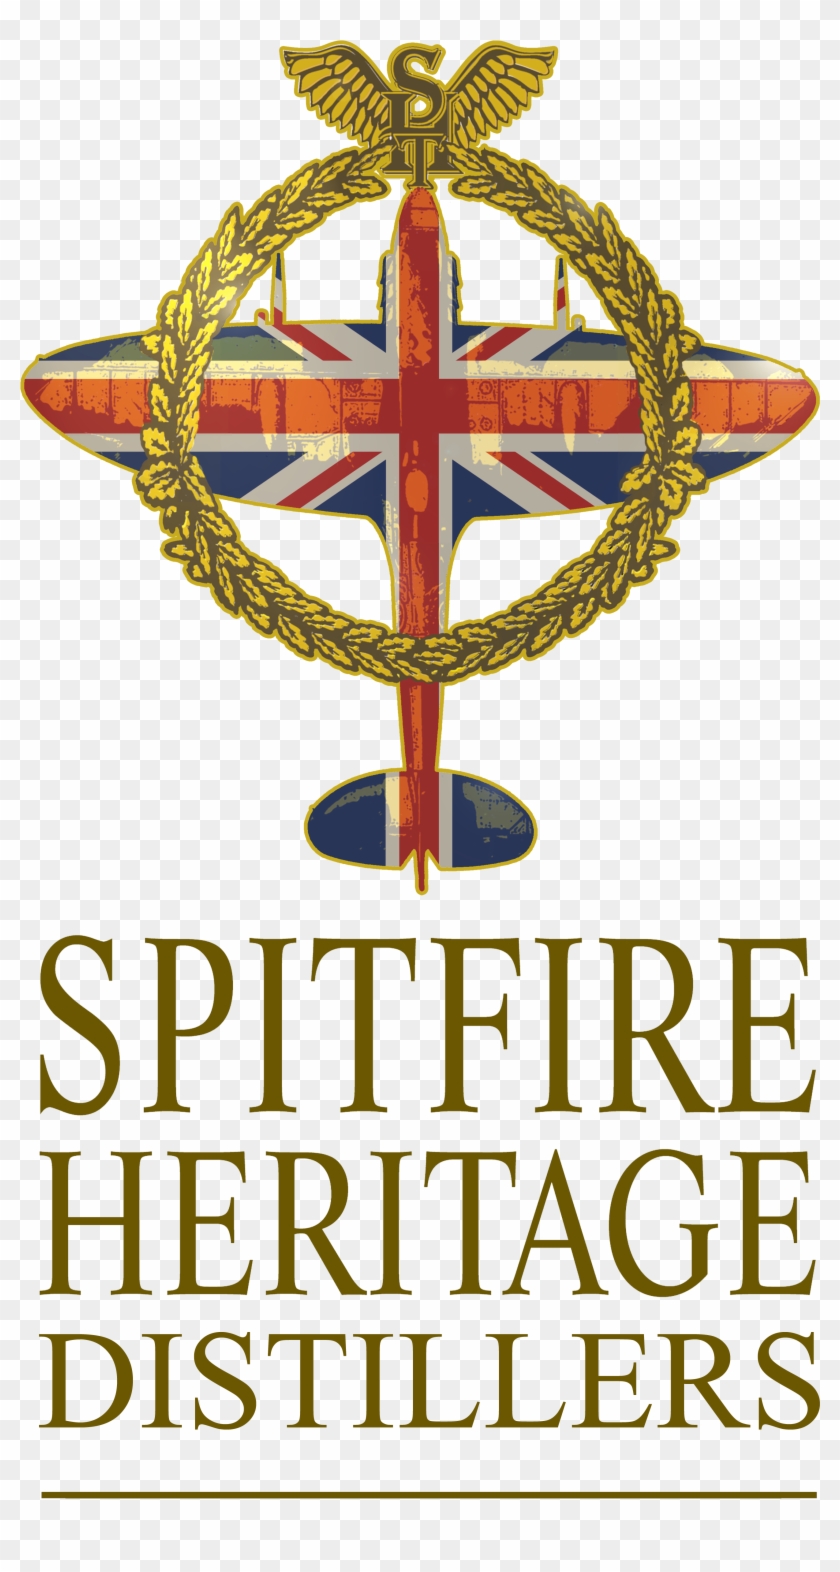 Spitfire Heritage Distillers Logo - Heritage Valley Health Systems Logo Clipart